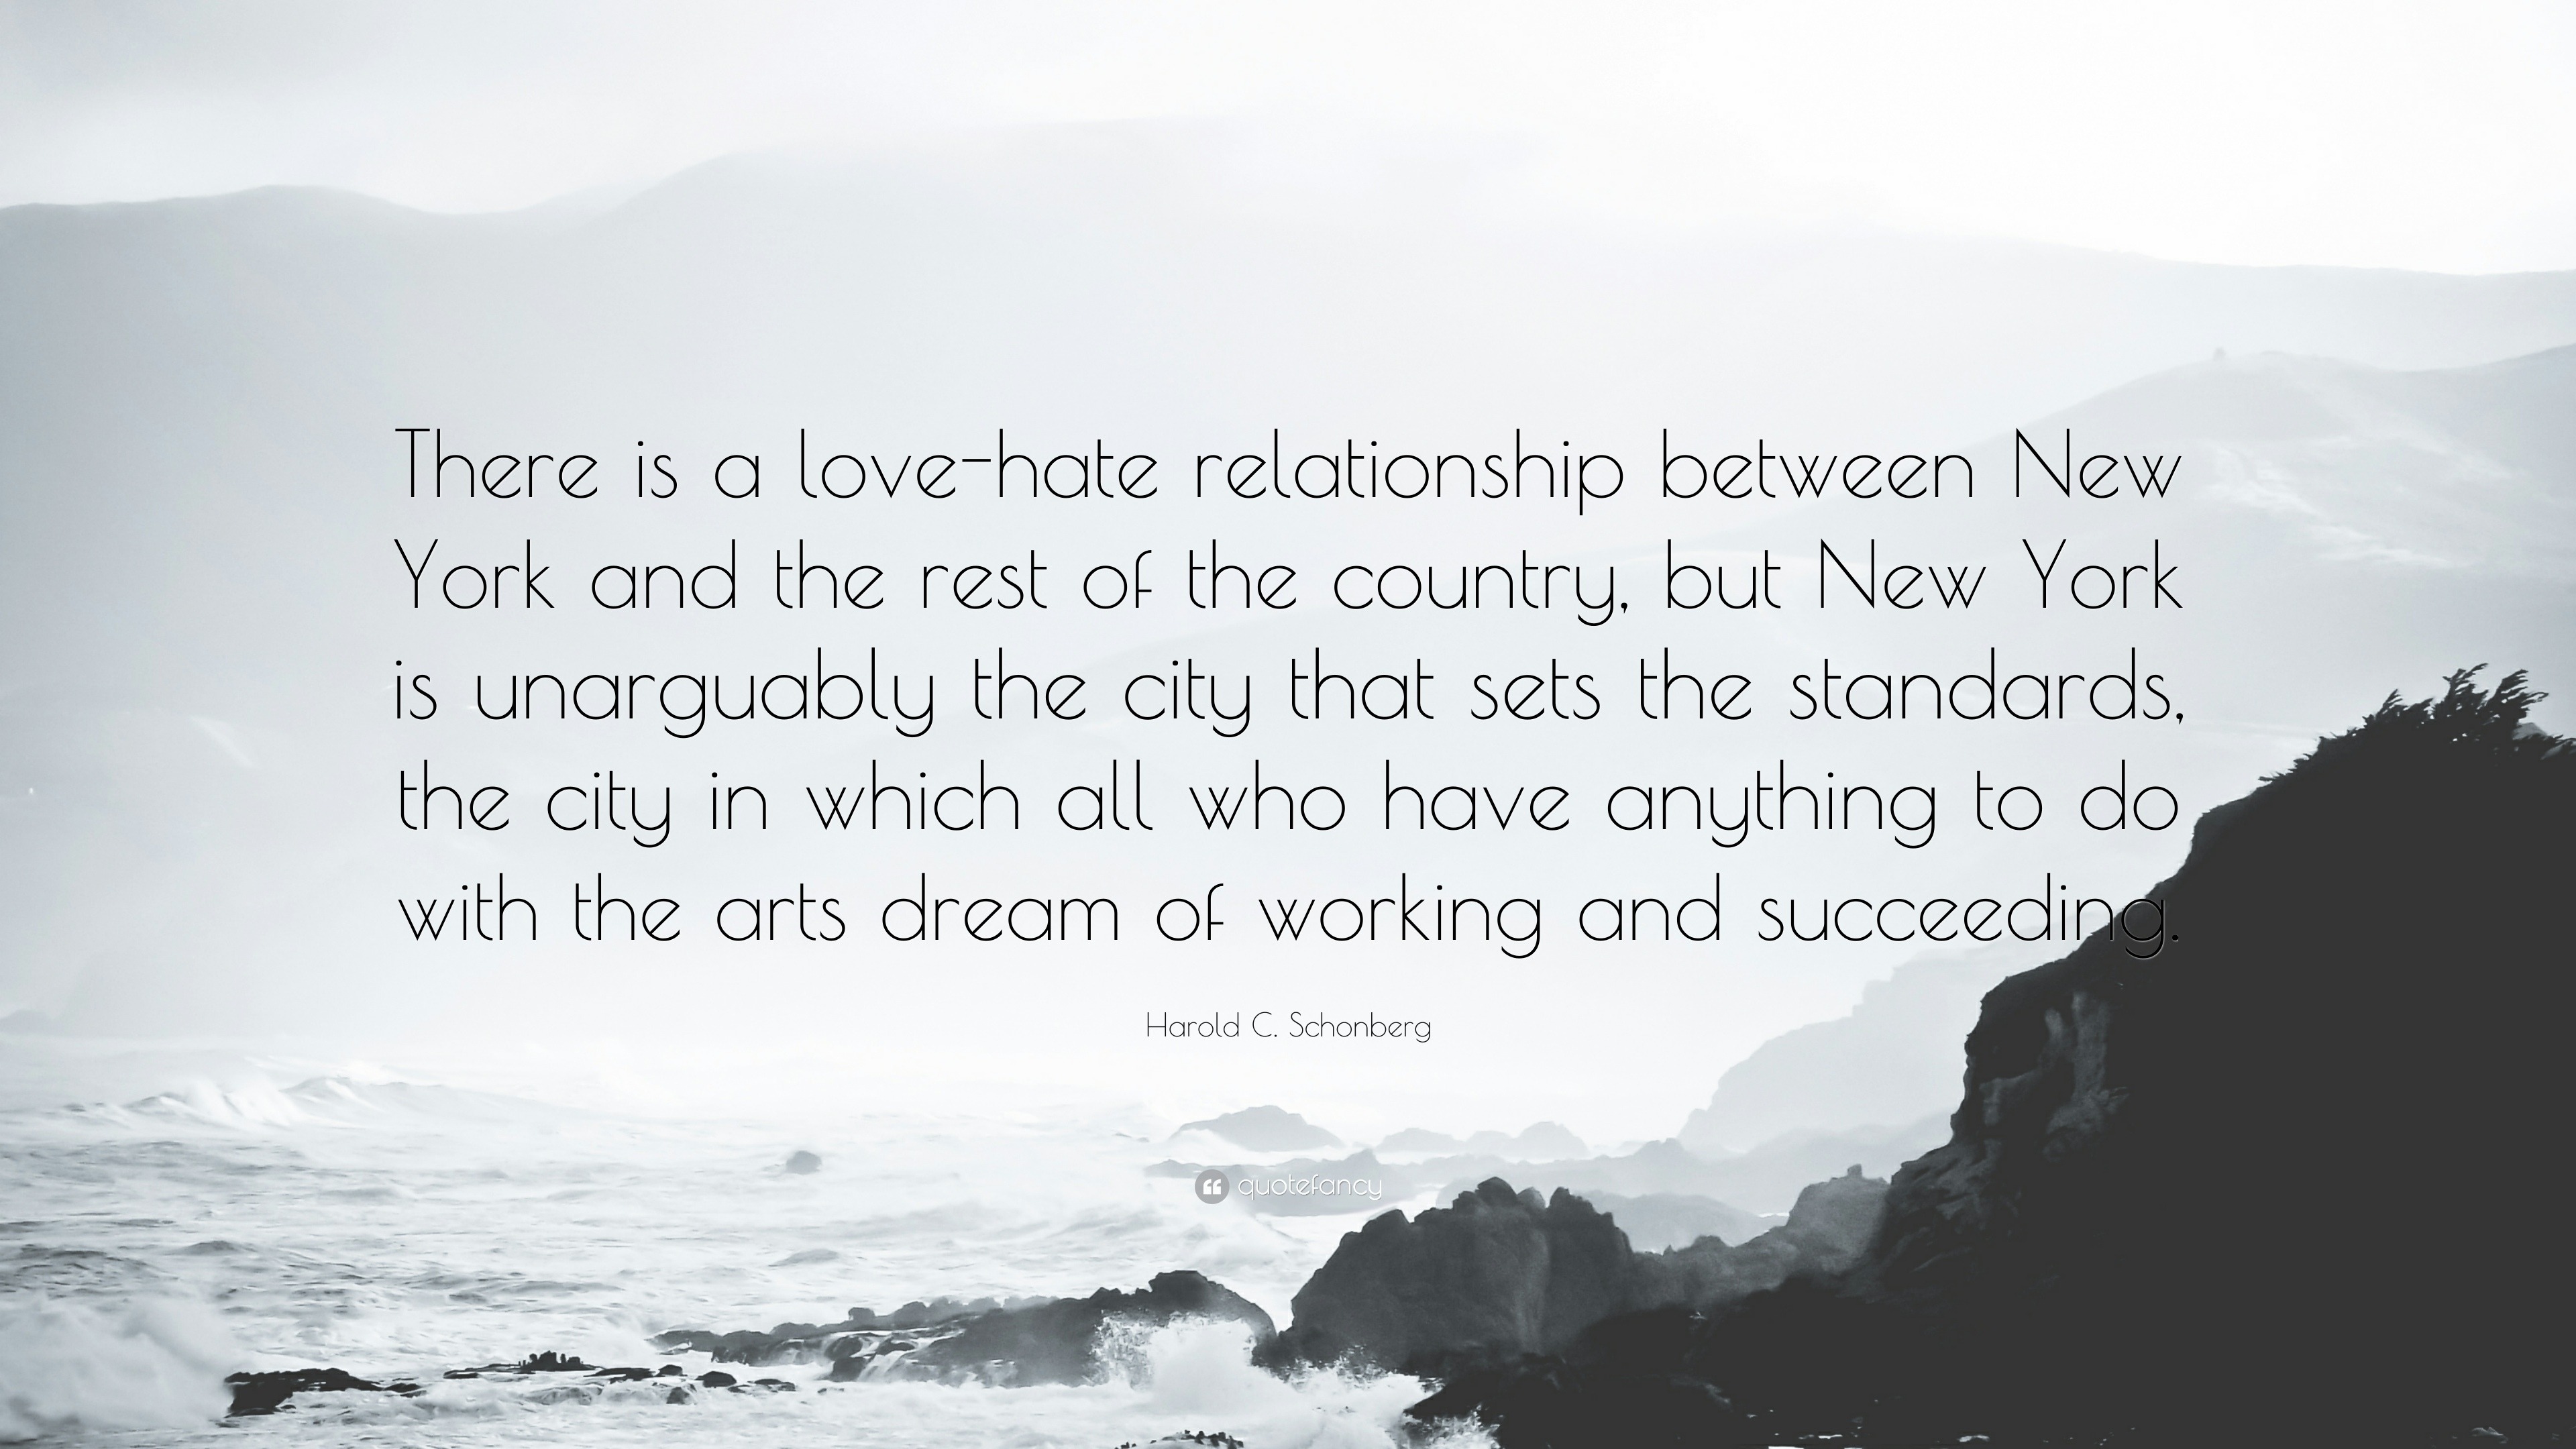 Harold C Schonberg Quote “There is a love hate relationship between New